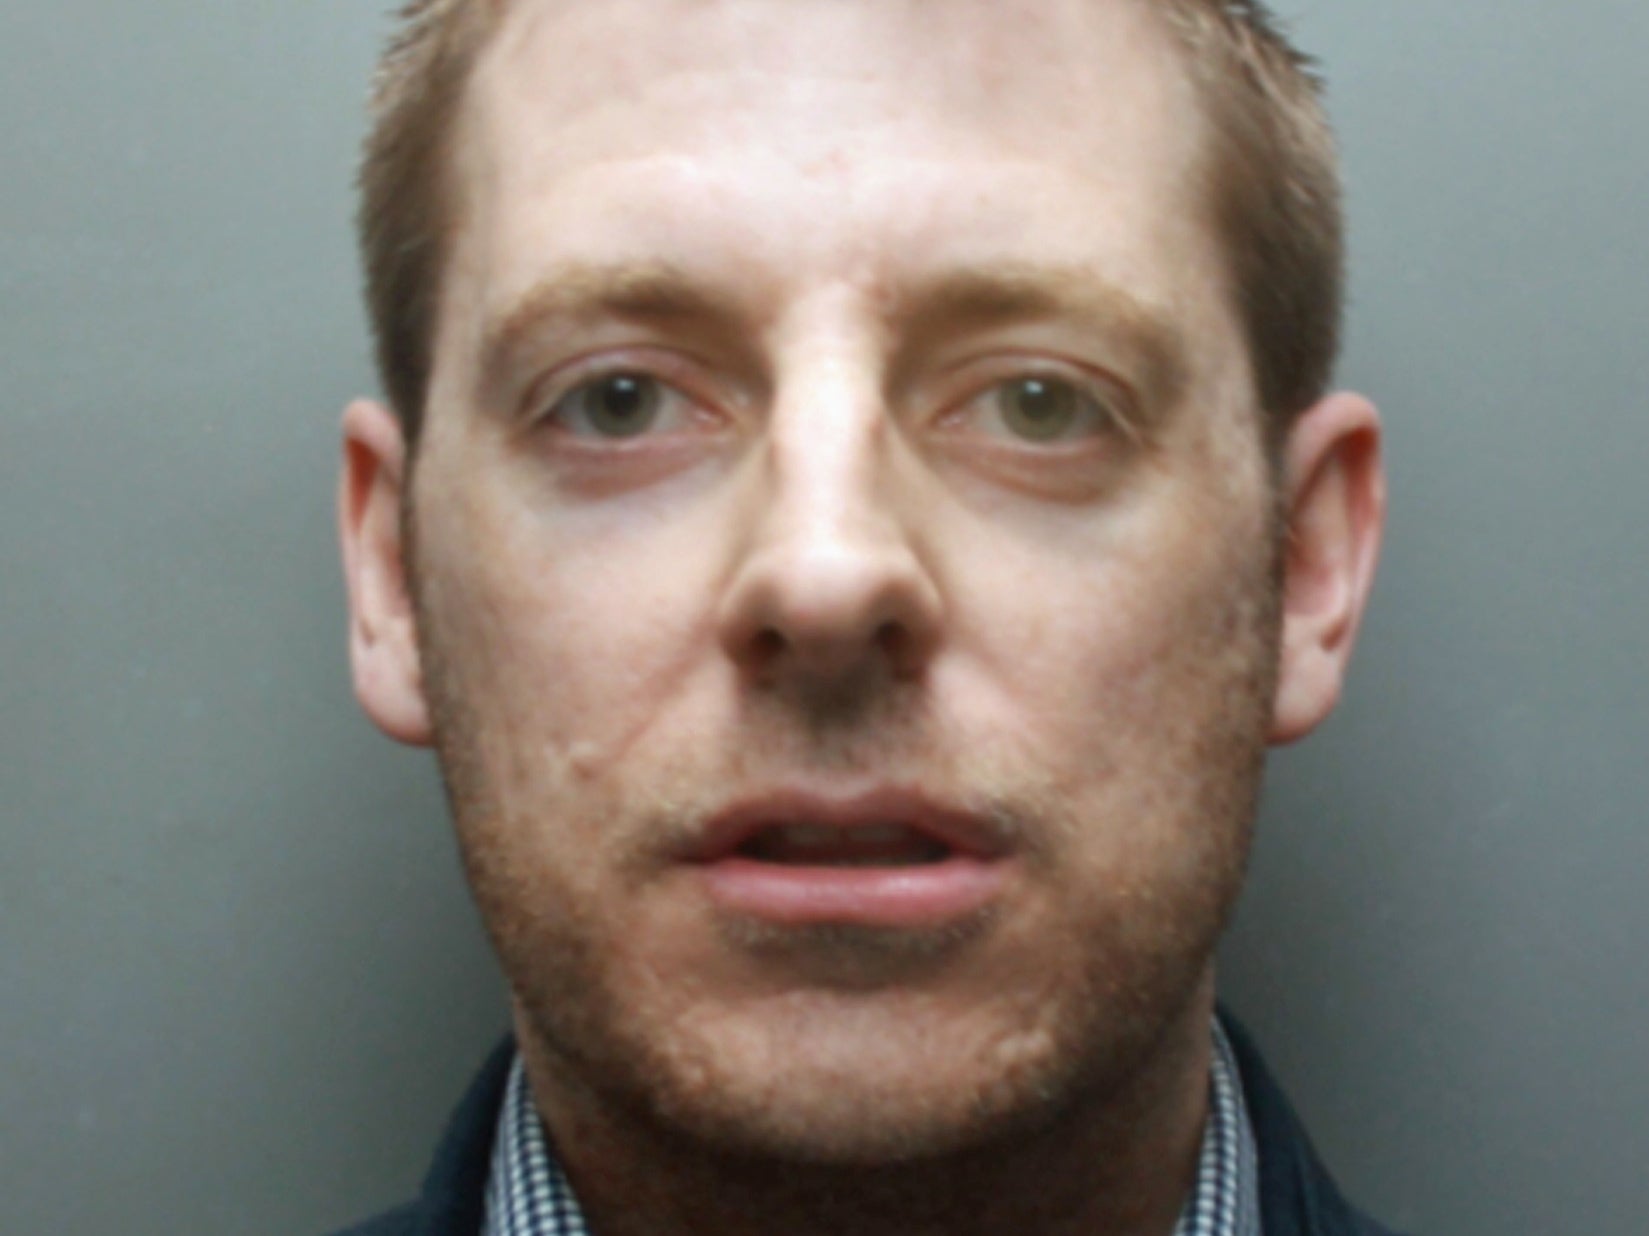 Nicholas Clayton has been jailed for 20 months